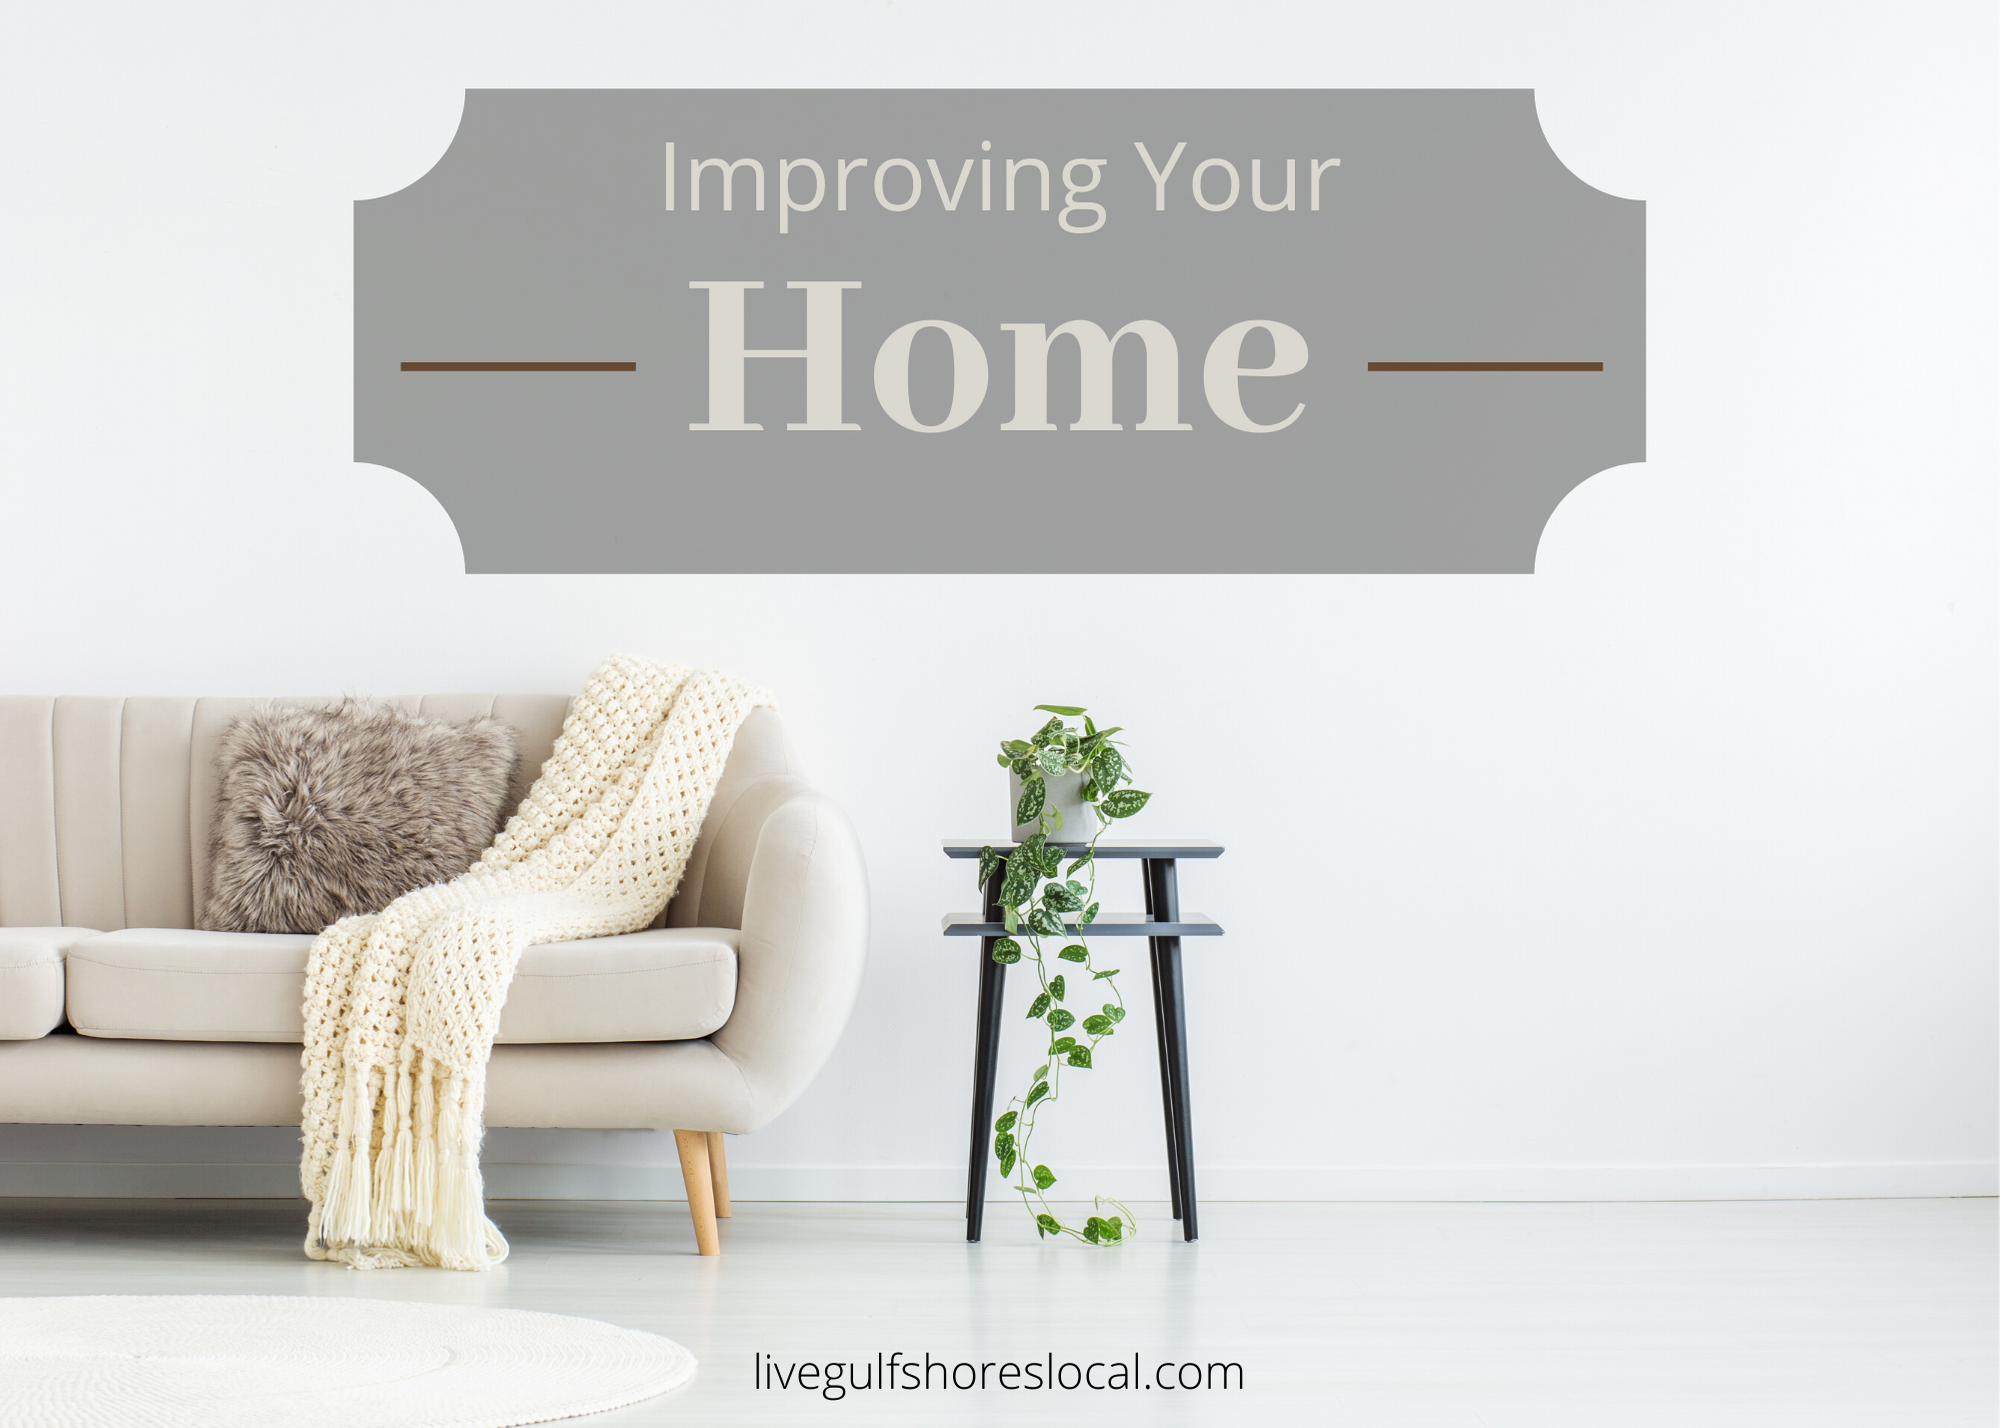 Improving Your Home - Gulf Shores